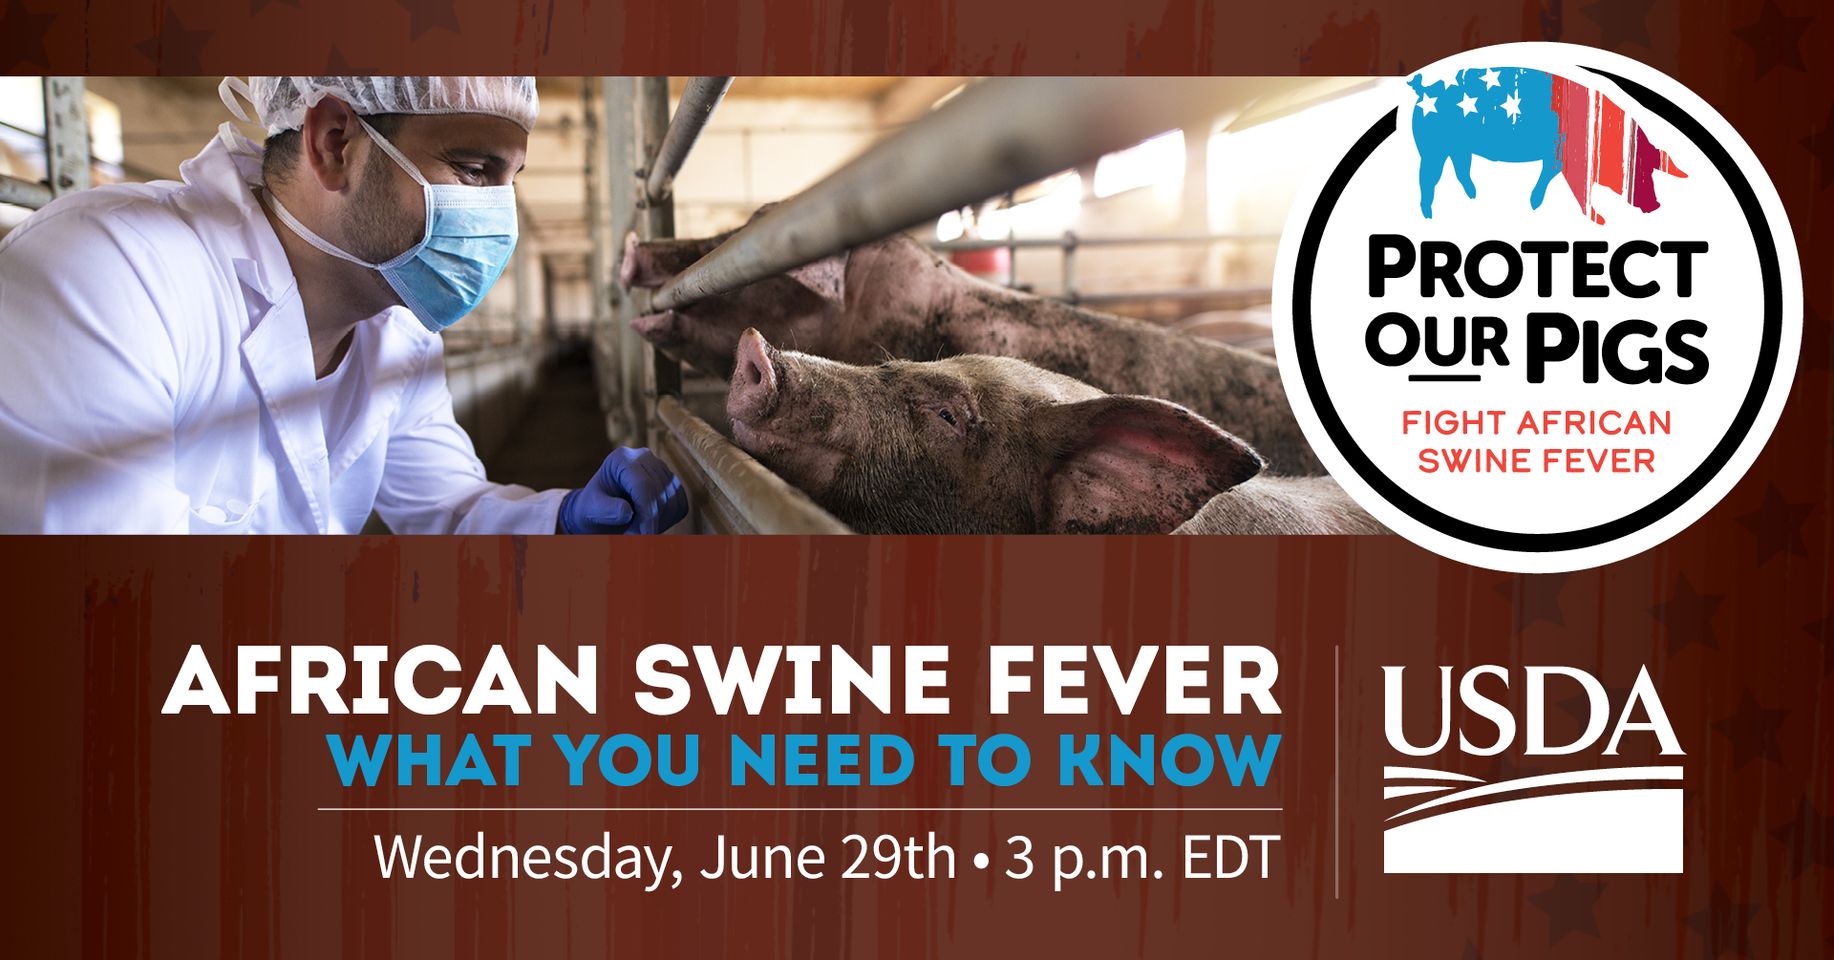 African swine fever: What you need to know